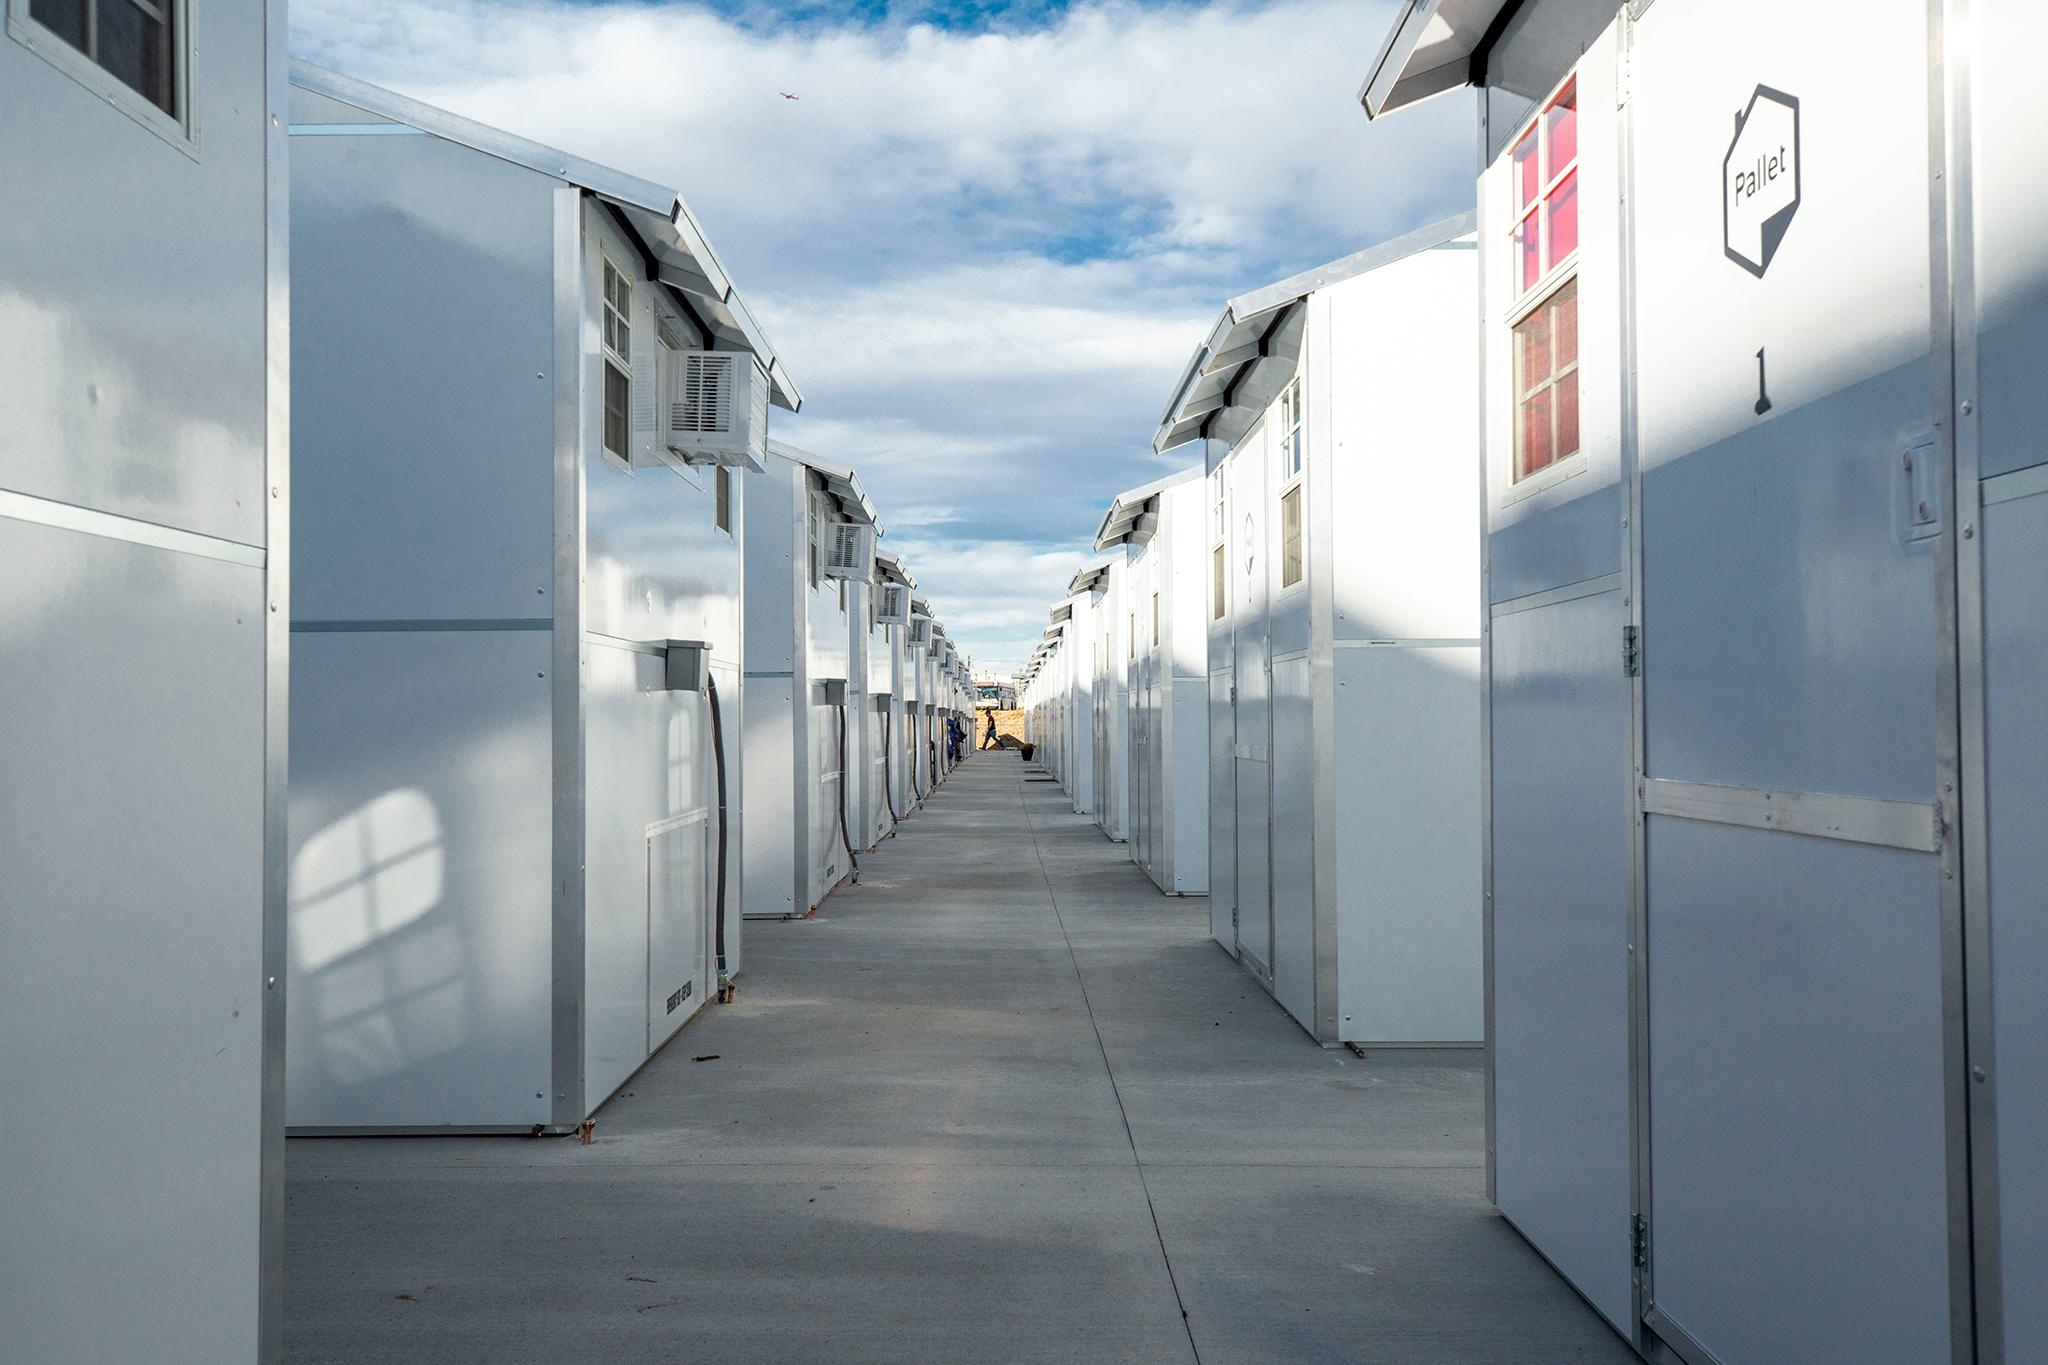 Aurora utilizes Pallet shelters to house 30 to 60 people experiencing